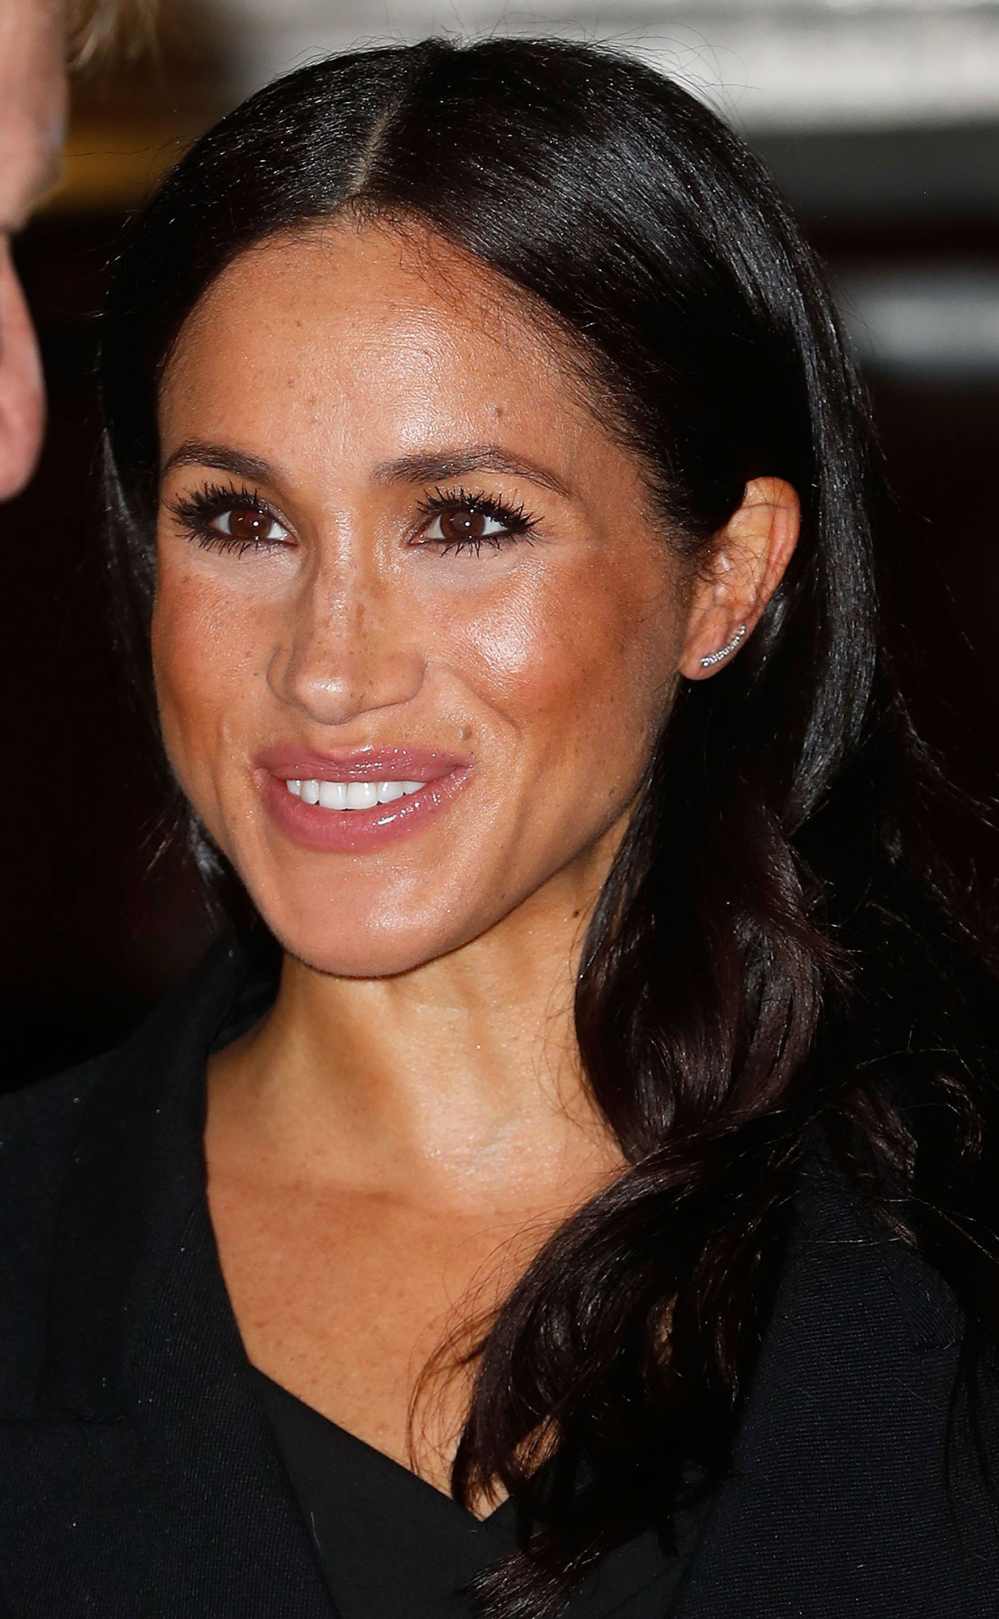 All About Meghan Markle's Christmas Earrings